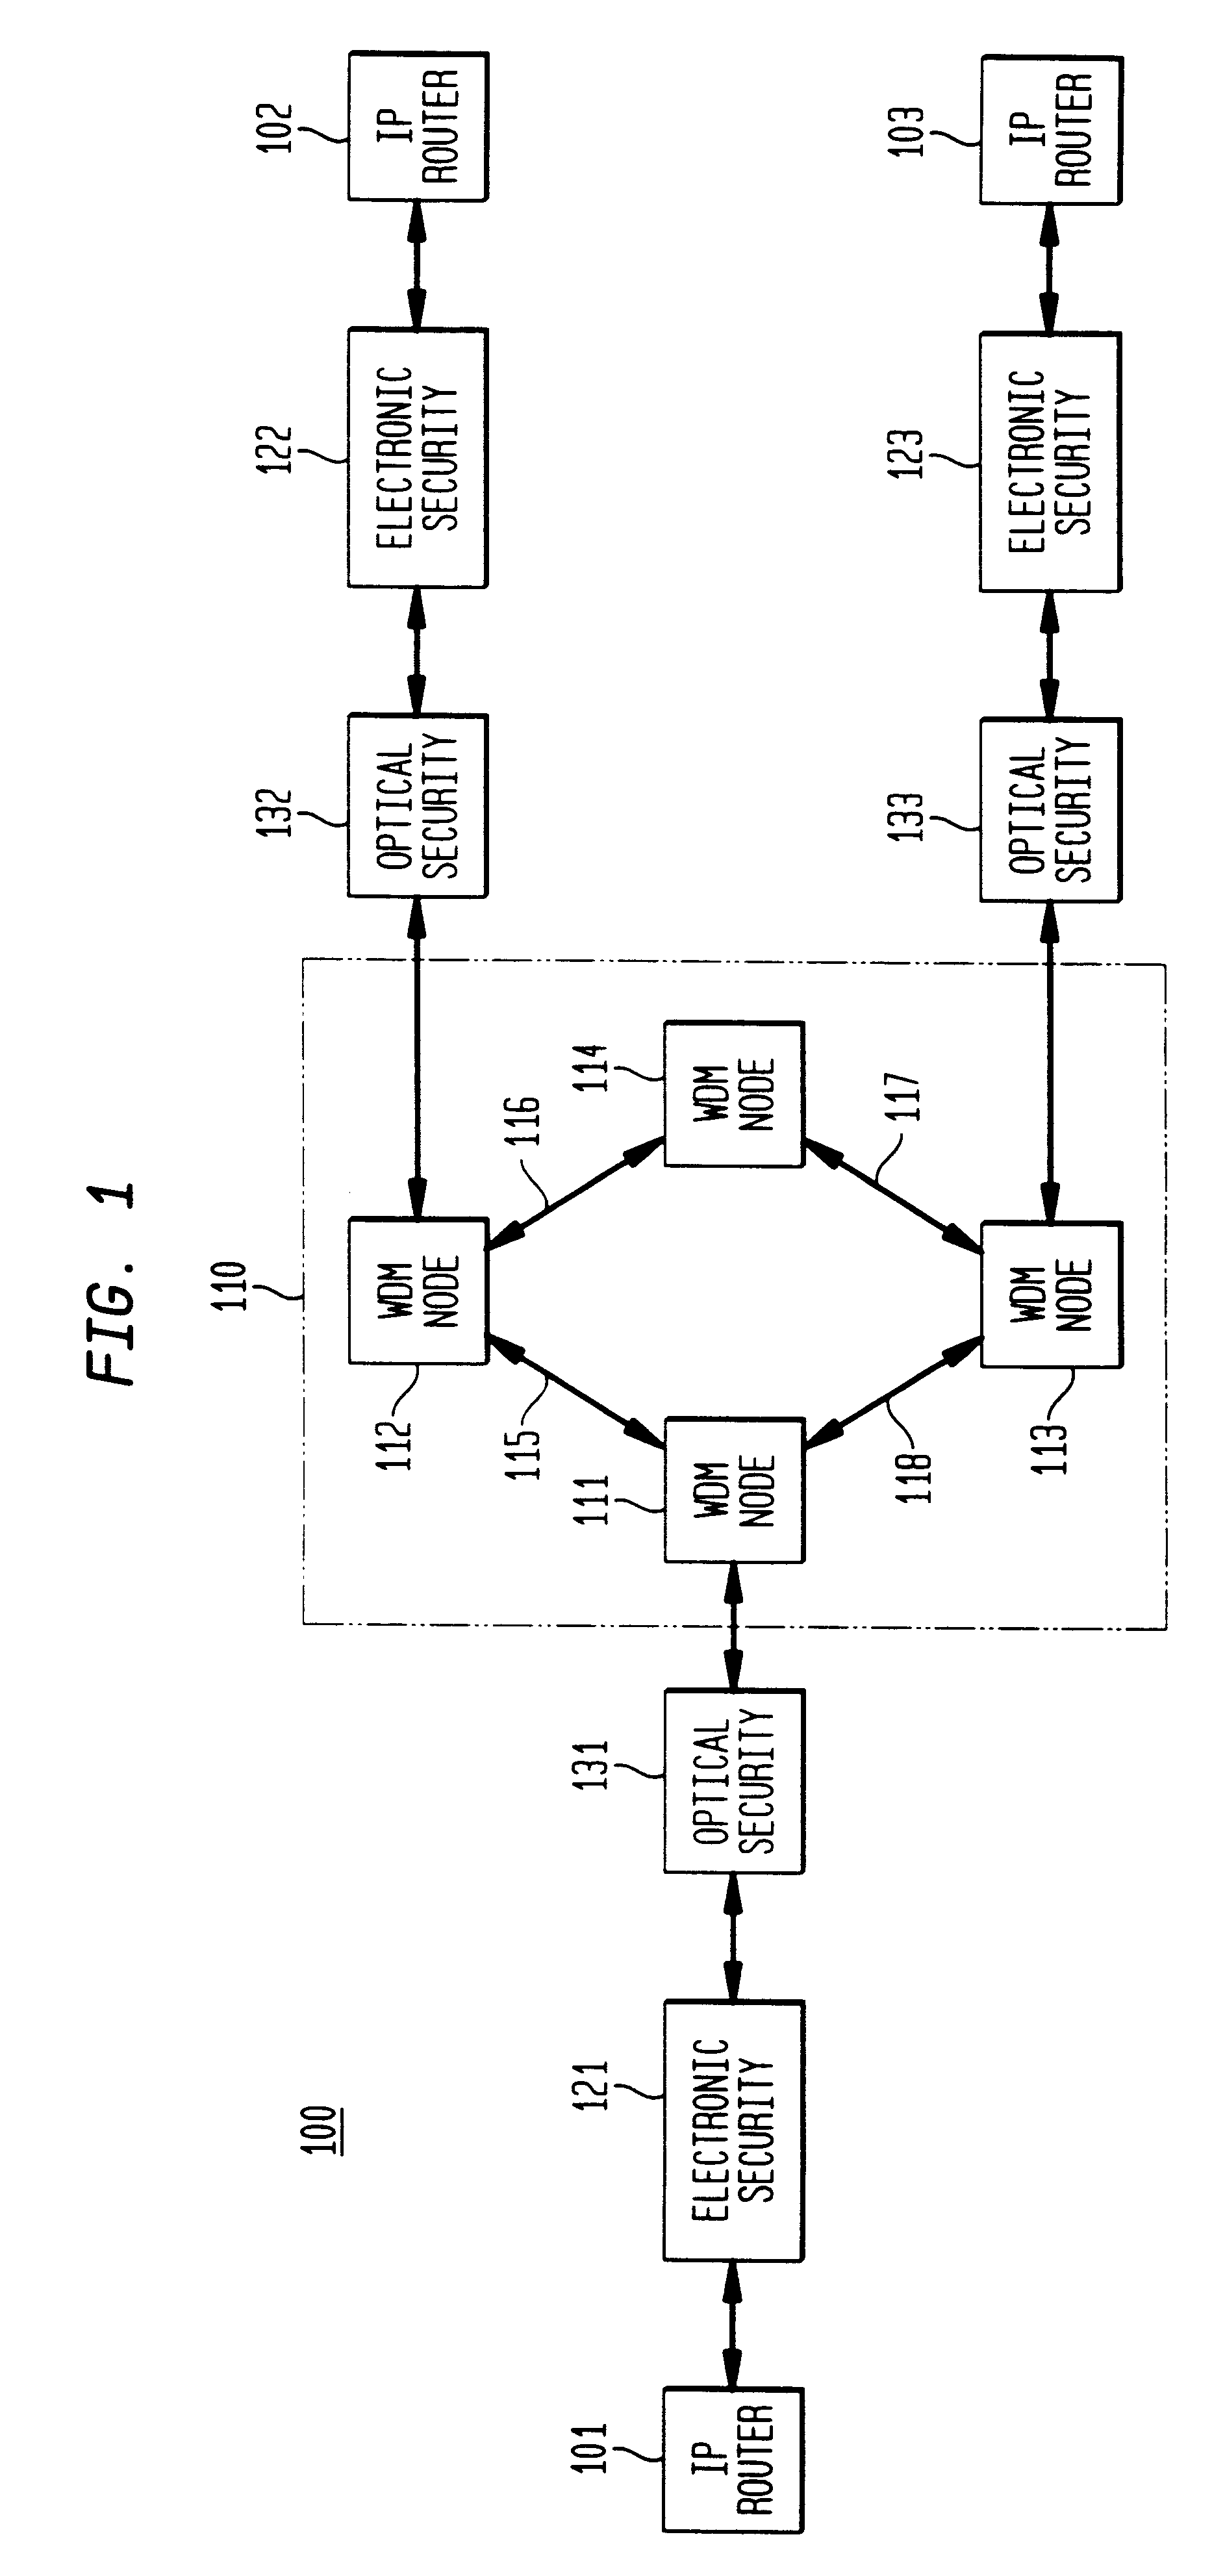 Optical layer survivability and security system using optical label switching and high-speed optical header generation and detection